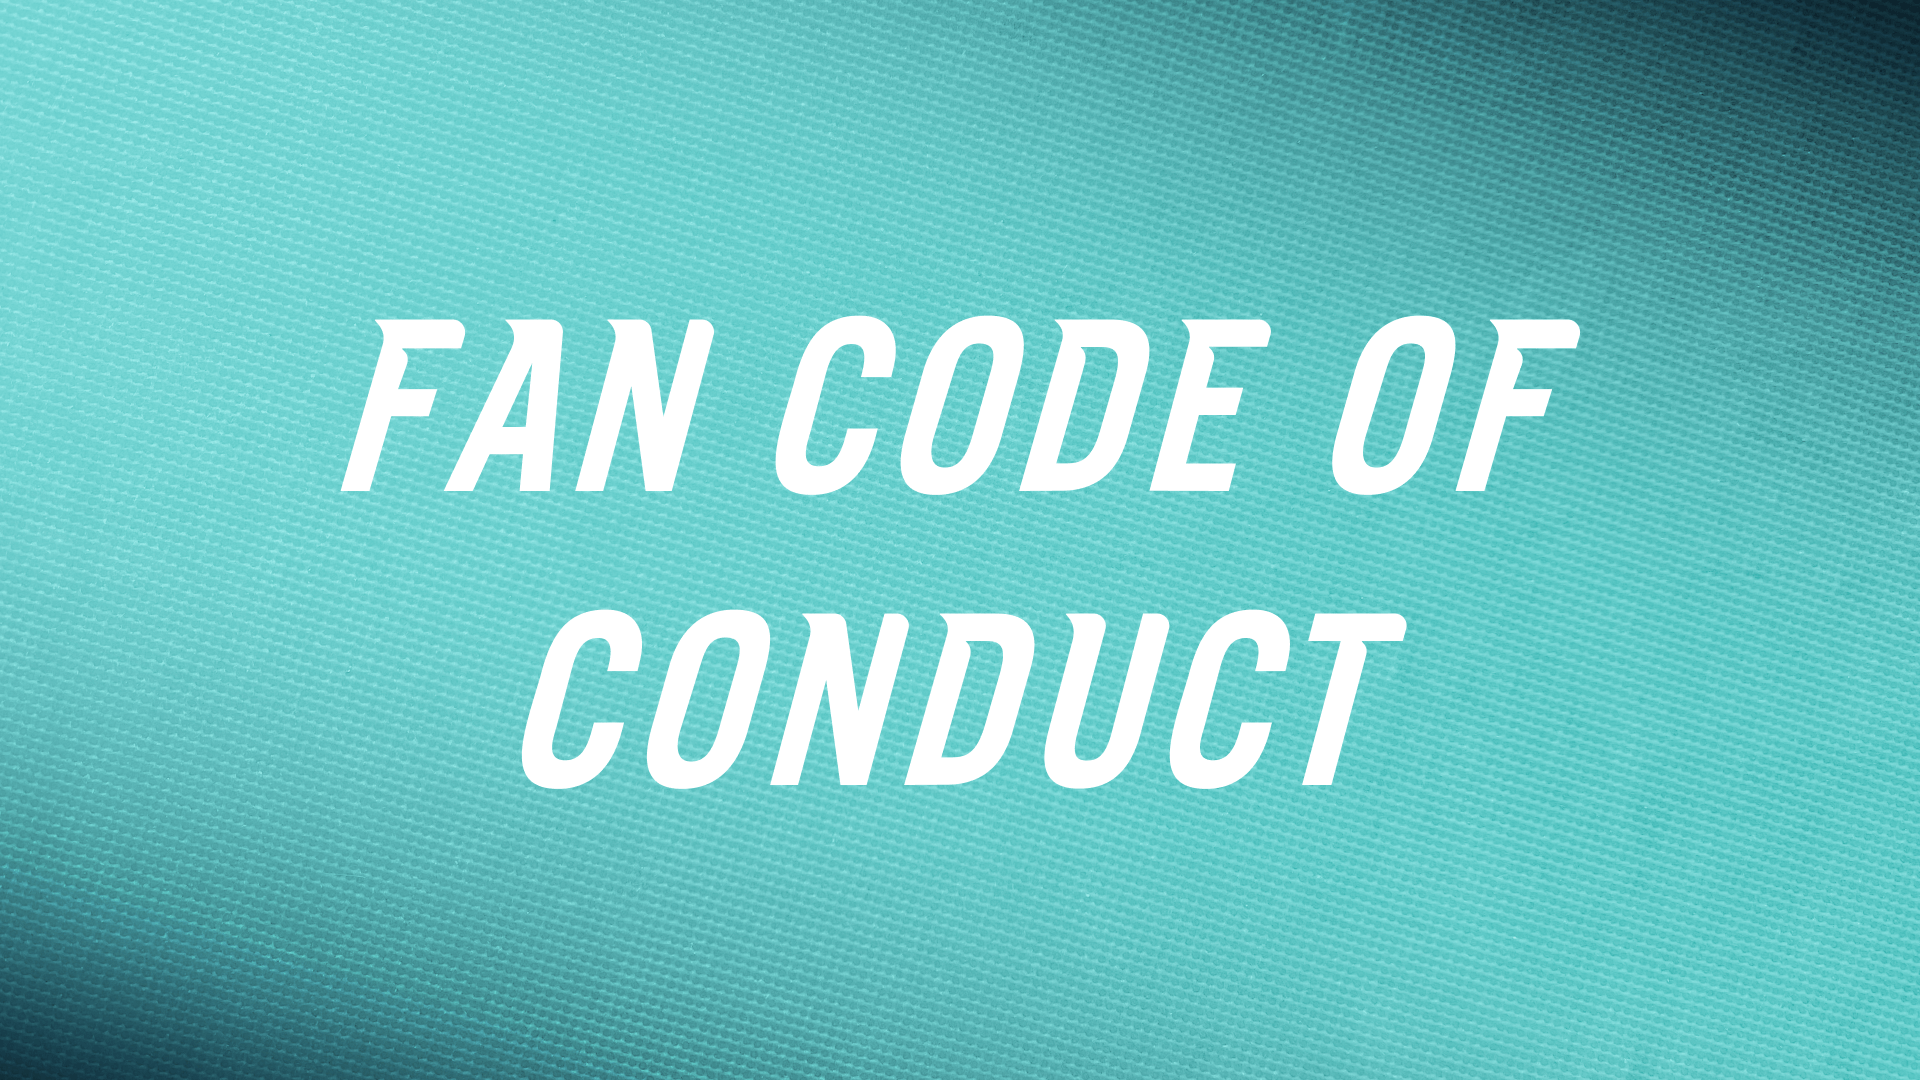 A graphic with the text "Fan Code of Conduct" on a navy background.